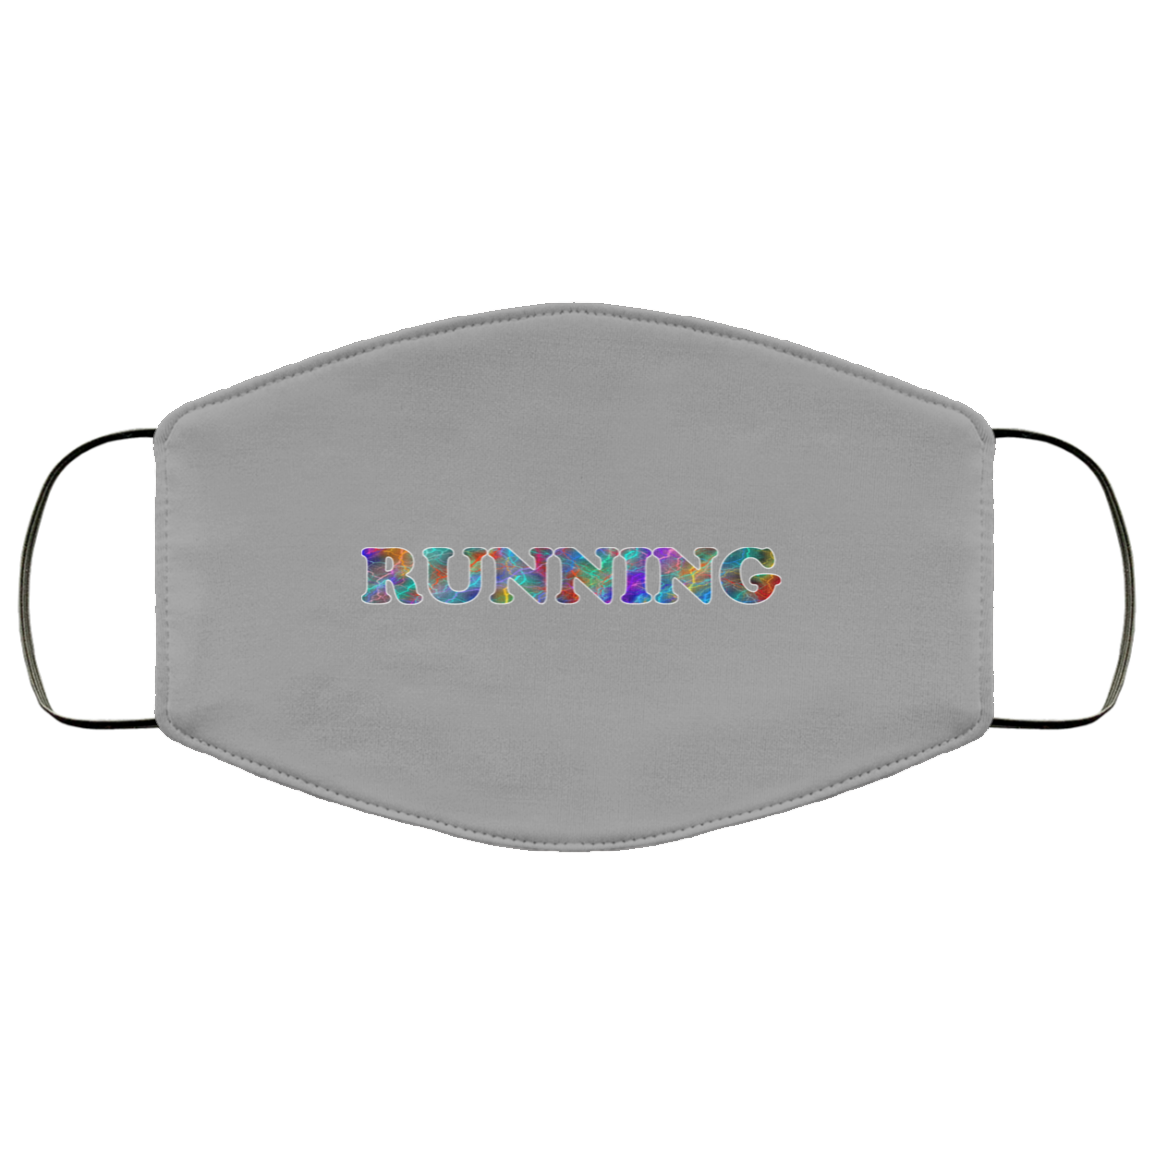 Running 2 Layer Protective Mask